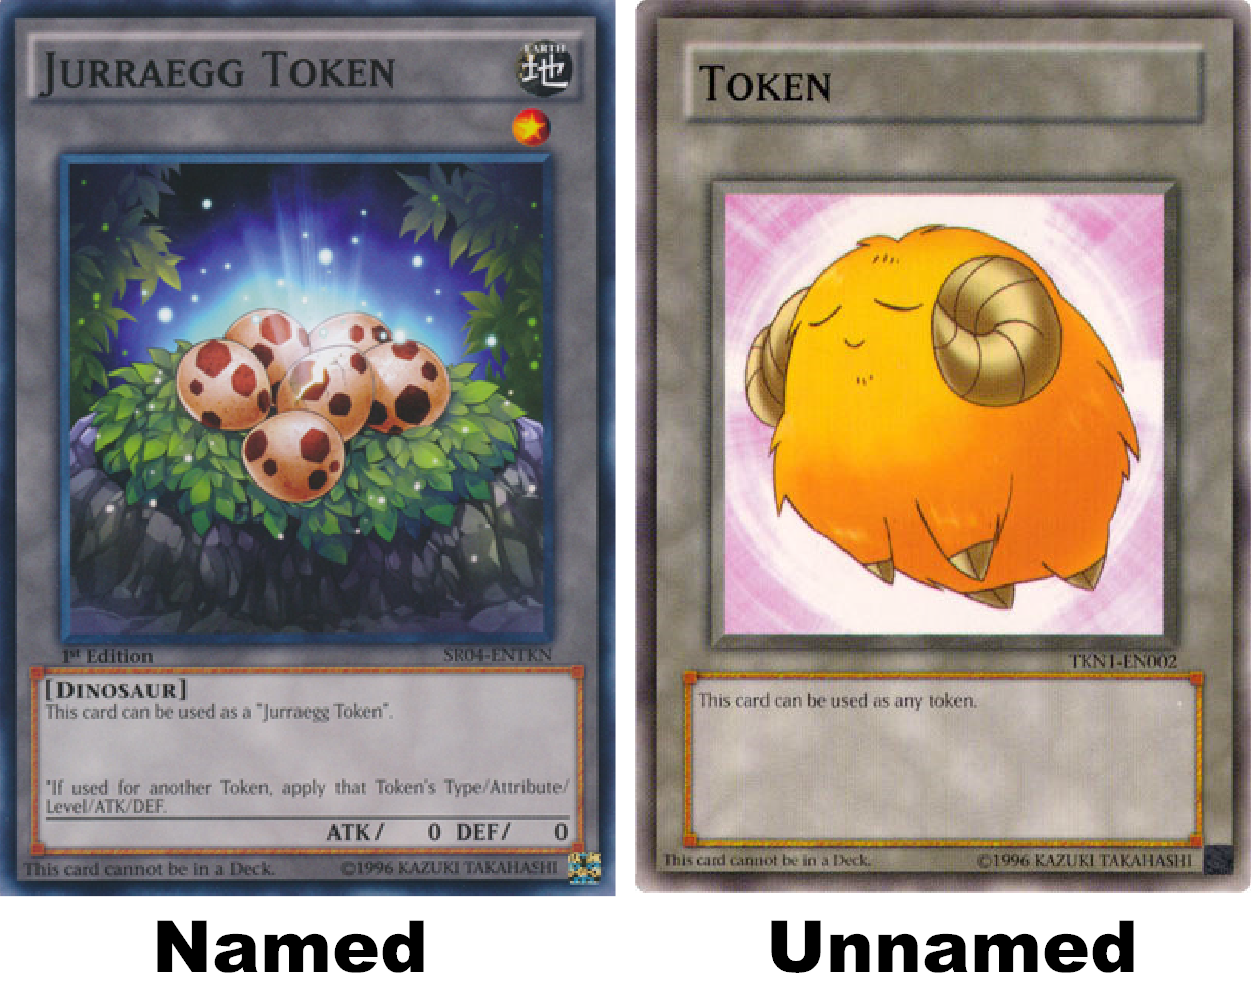 On my collection checklist, I have "Token" as one entry and the named ones as separate entries.